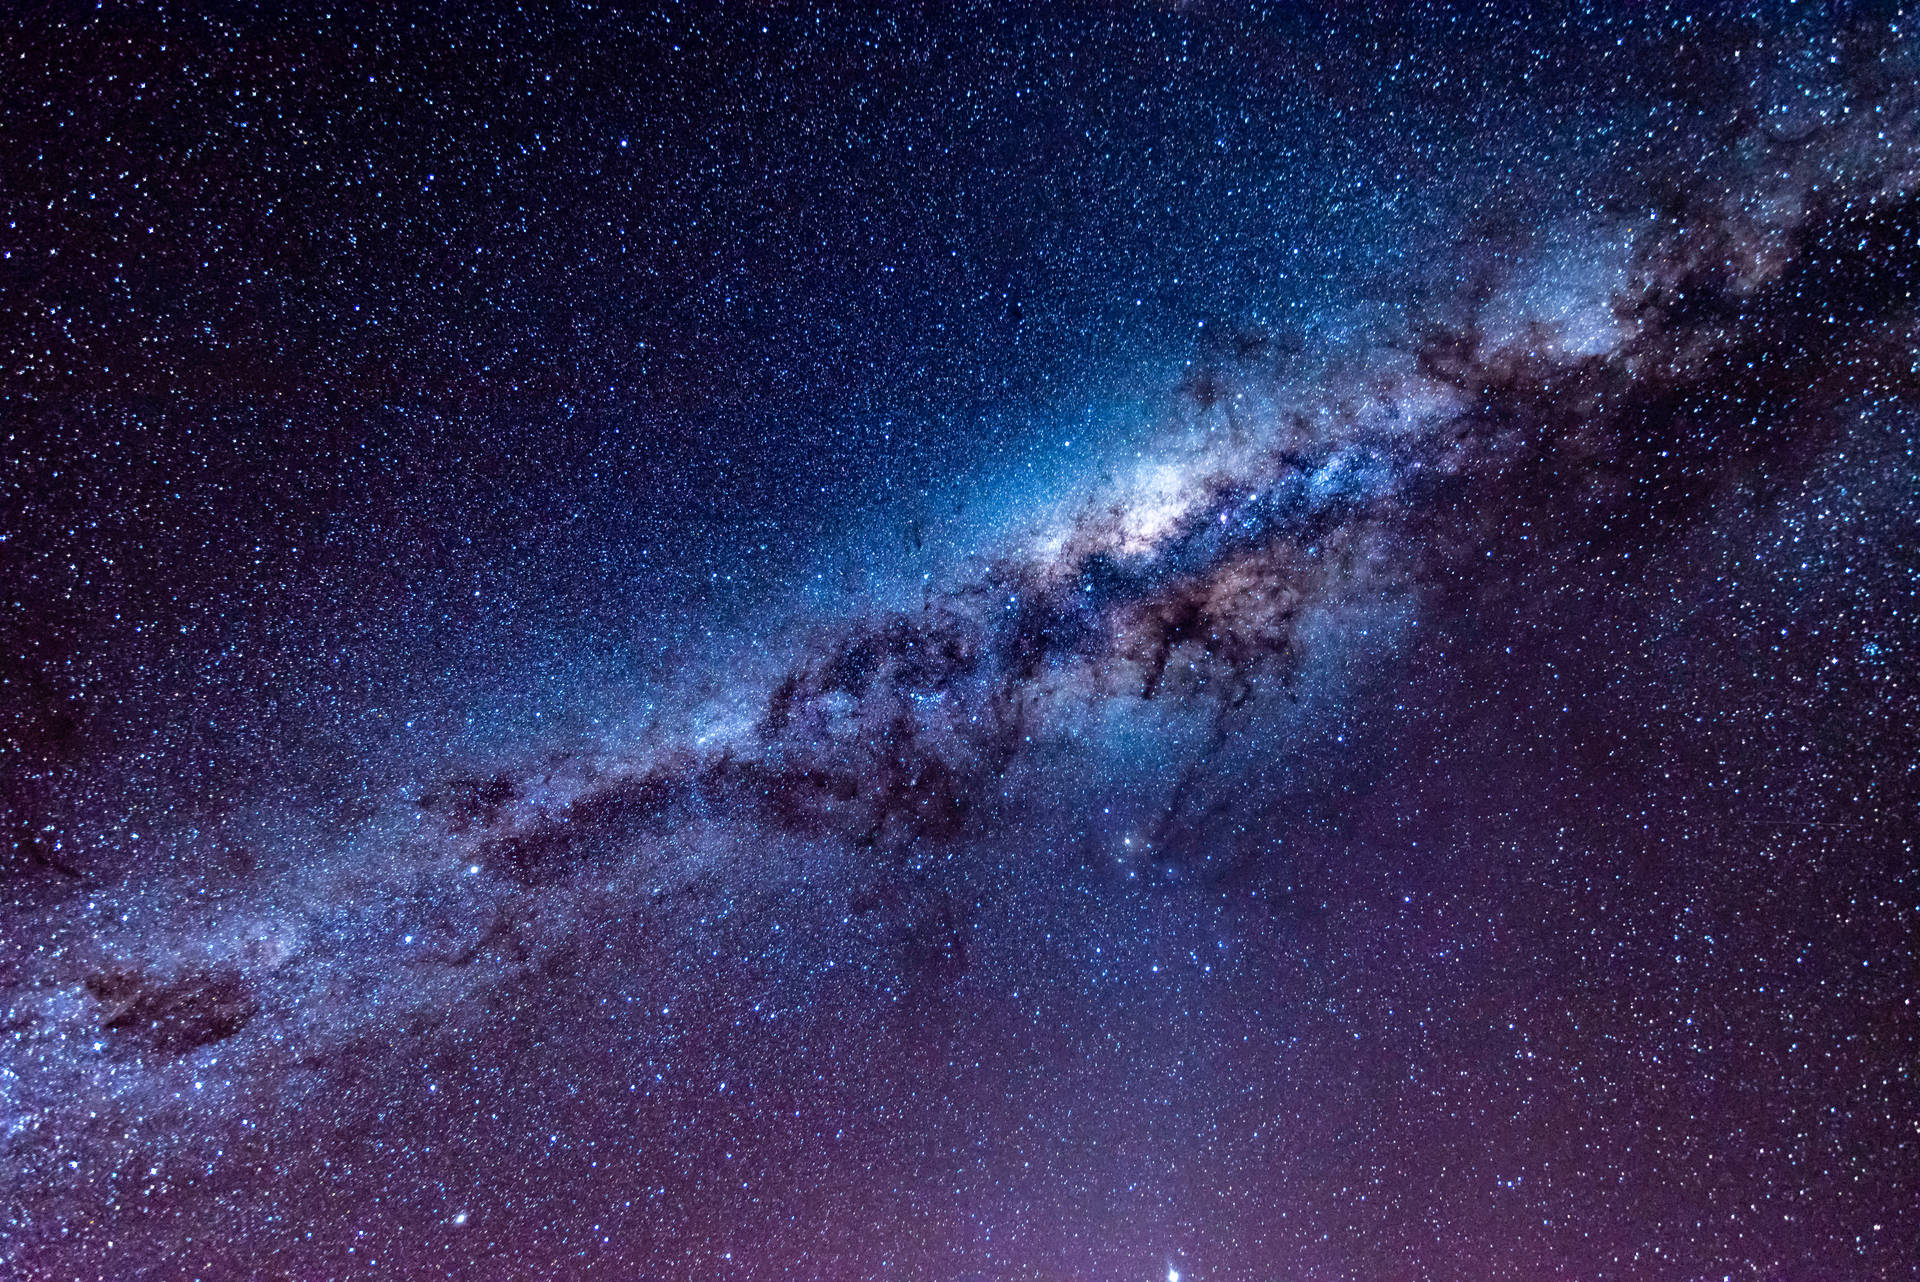 Milky Way 6016X4016 Wallpaper and Background Image